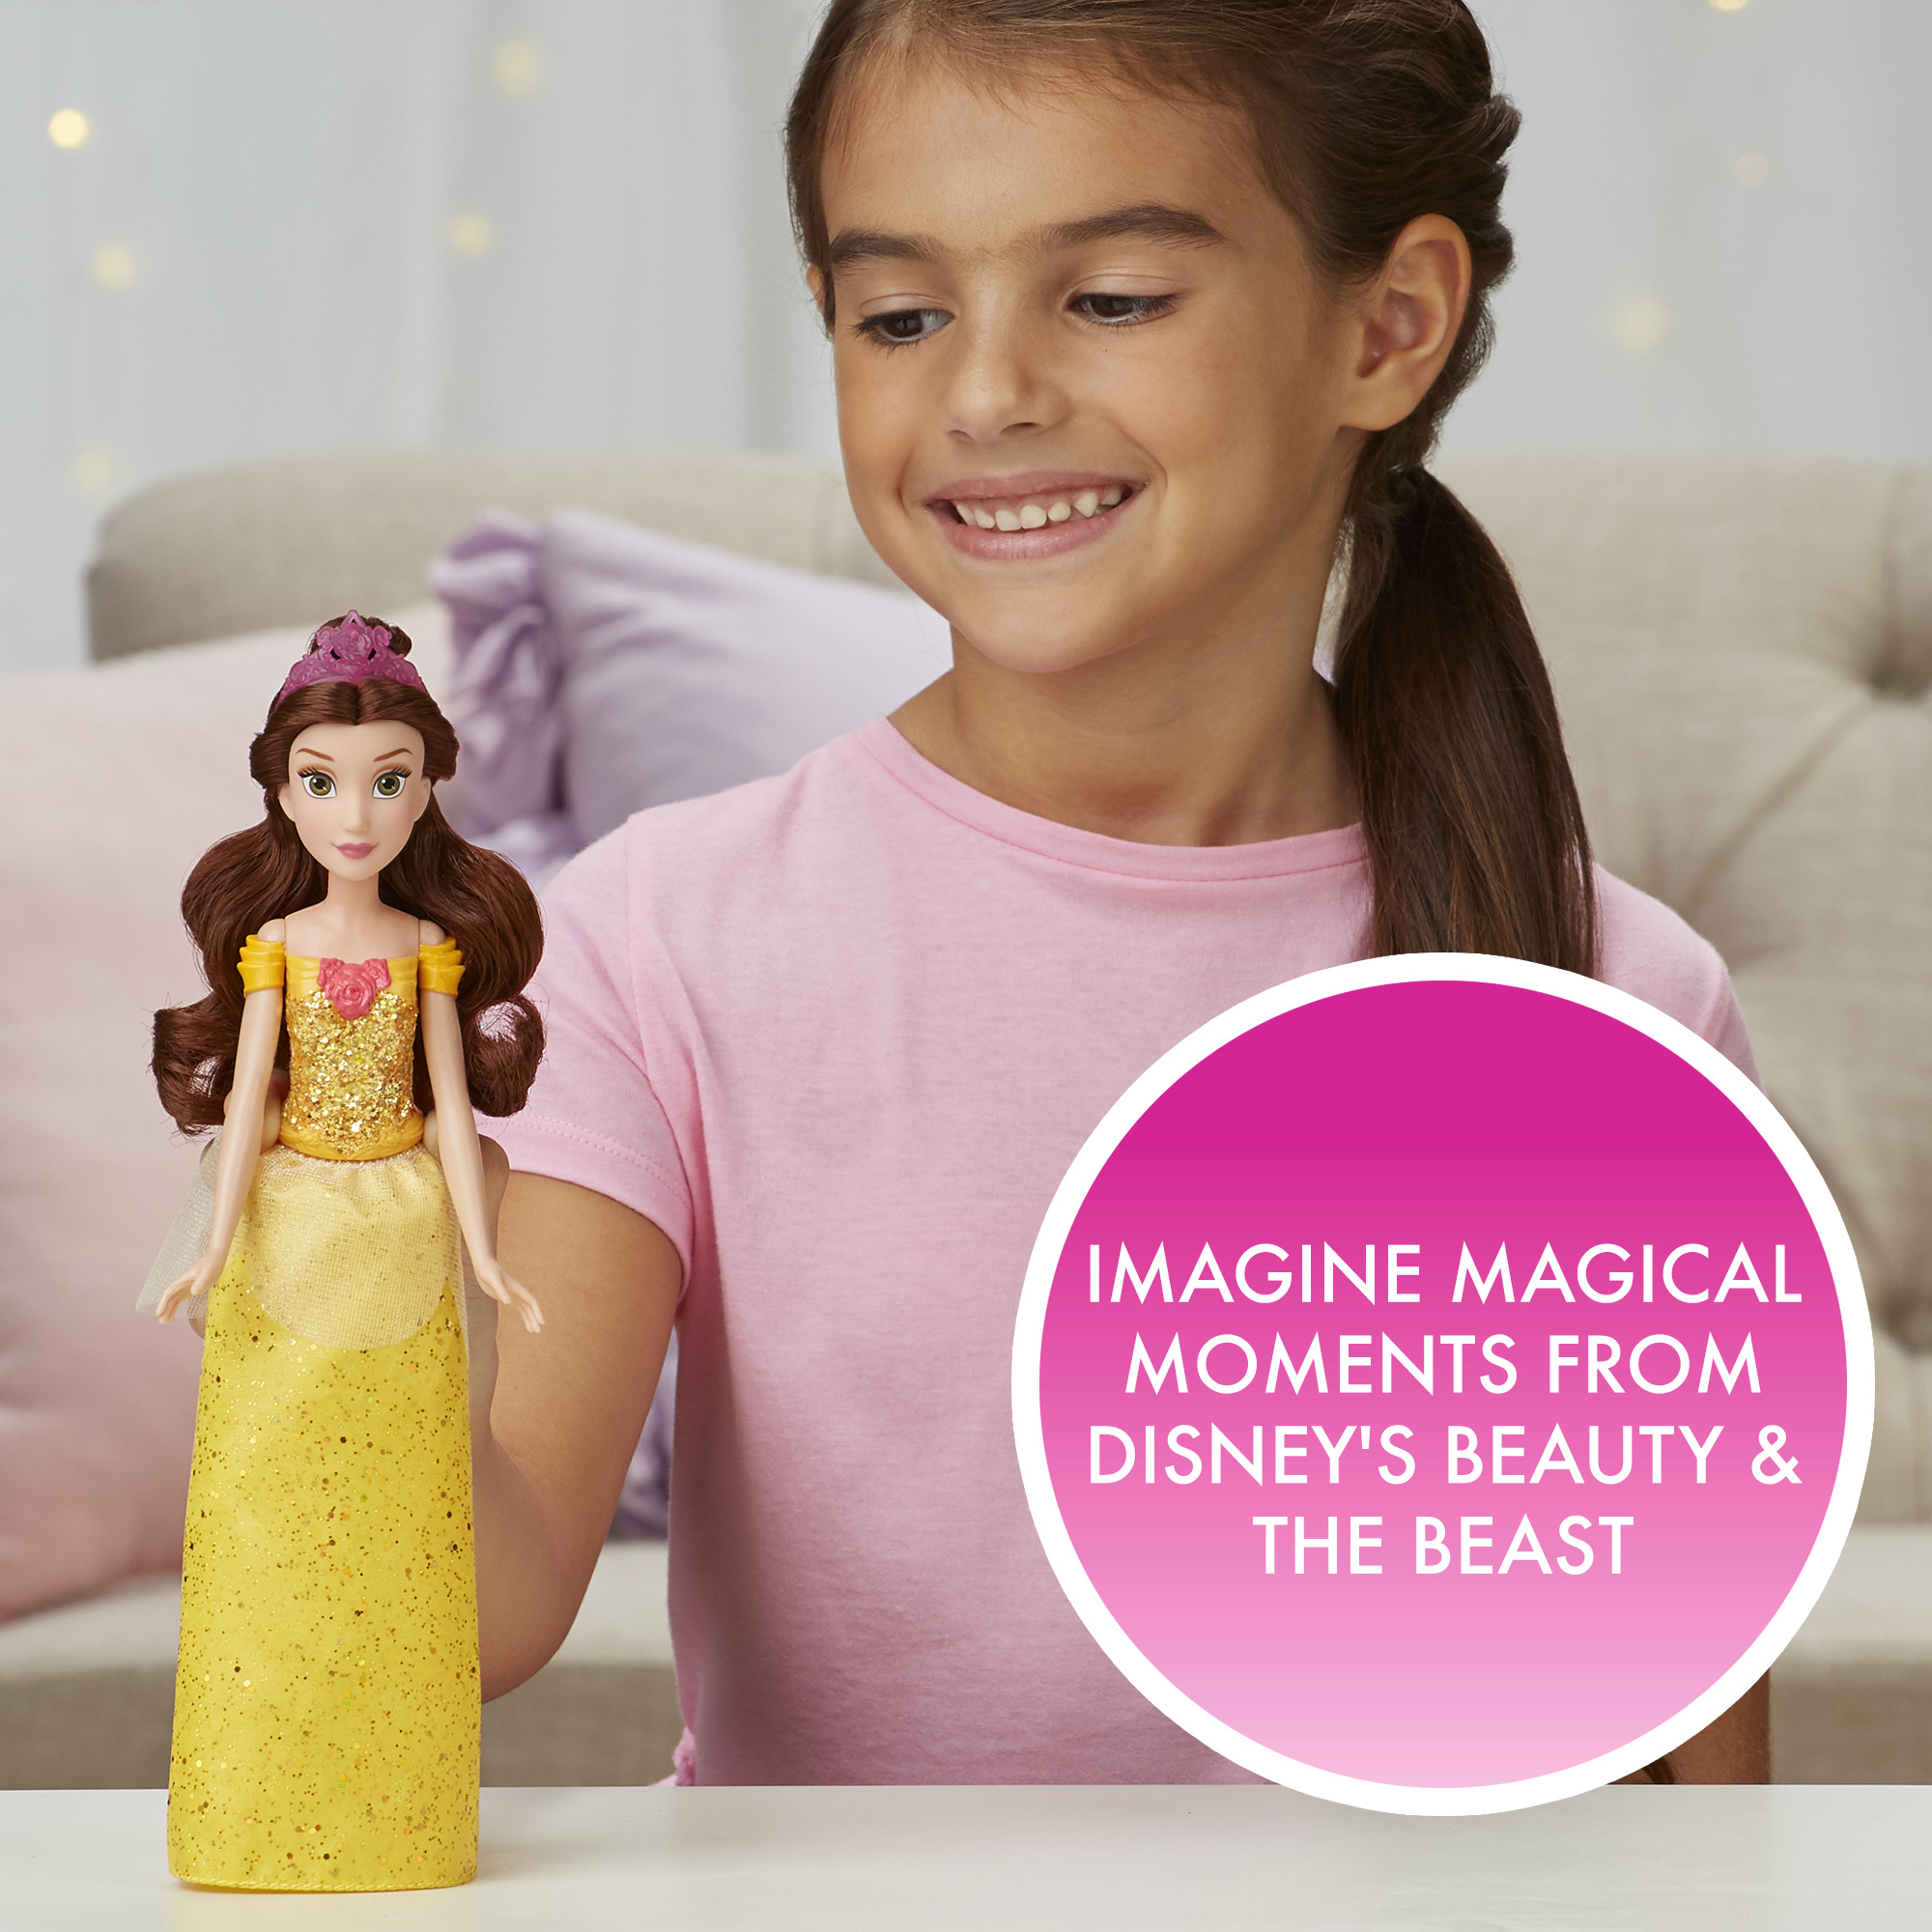 Disney Princess Royal Shimmer Belle with Sparkly Skirt, Includes Tiara and Shoes - image 9 of 16